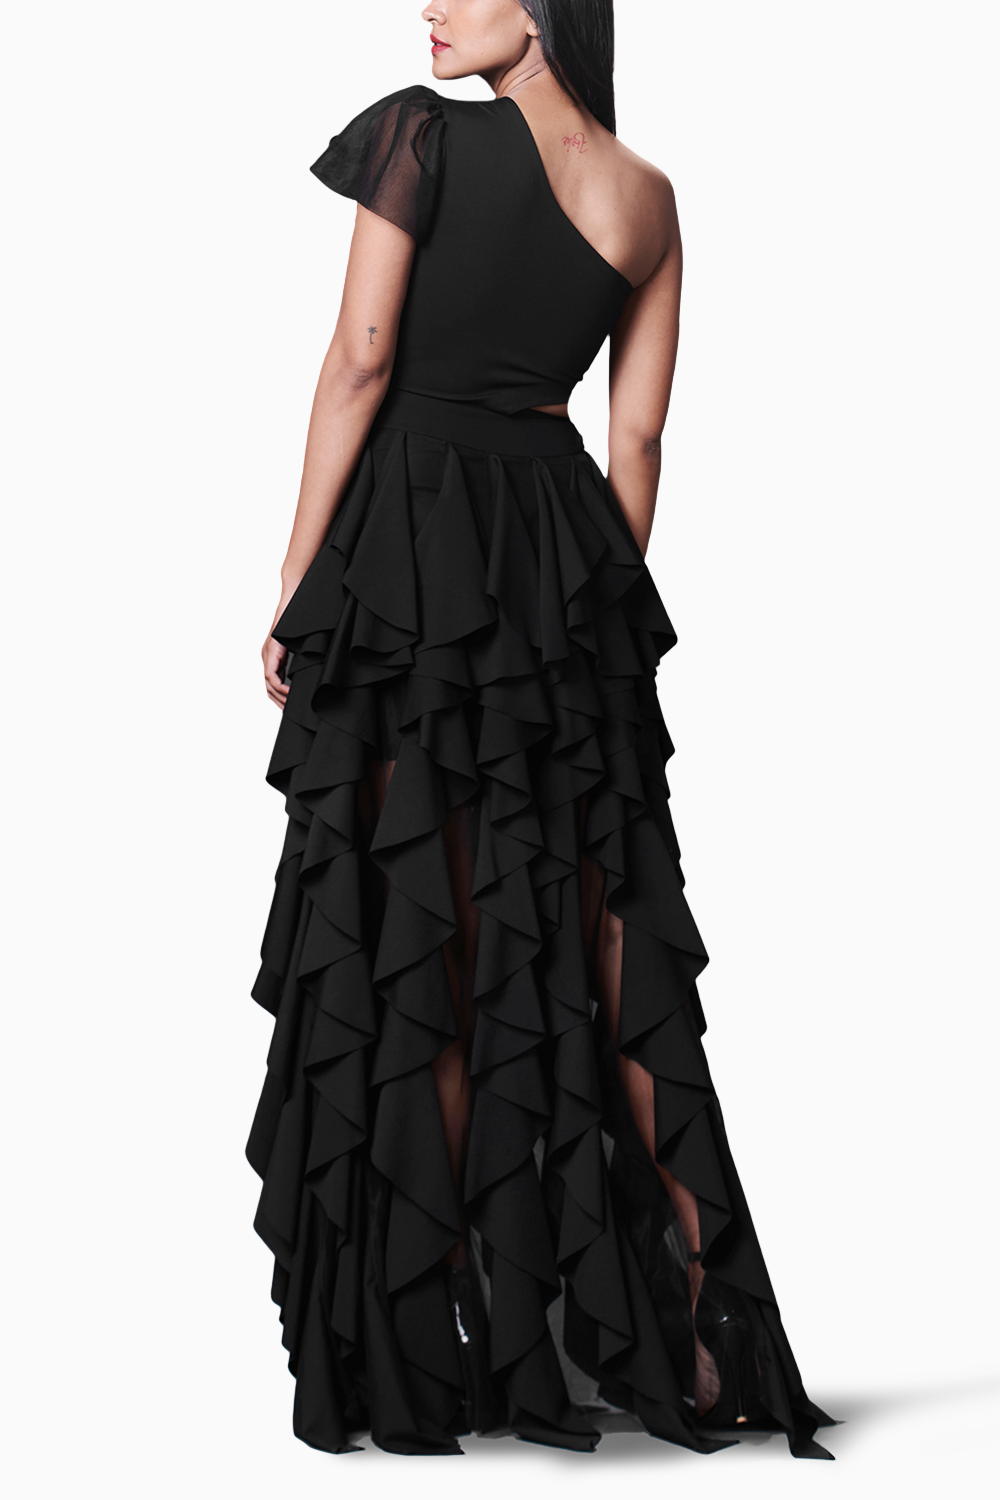 Black Hand Embroidered One Shoulder Ruffle Dress